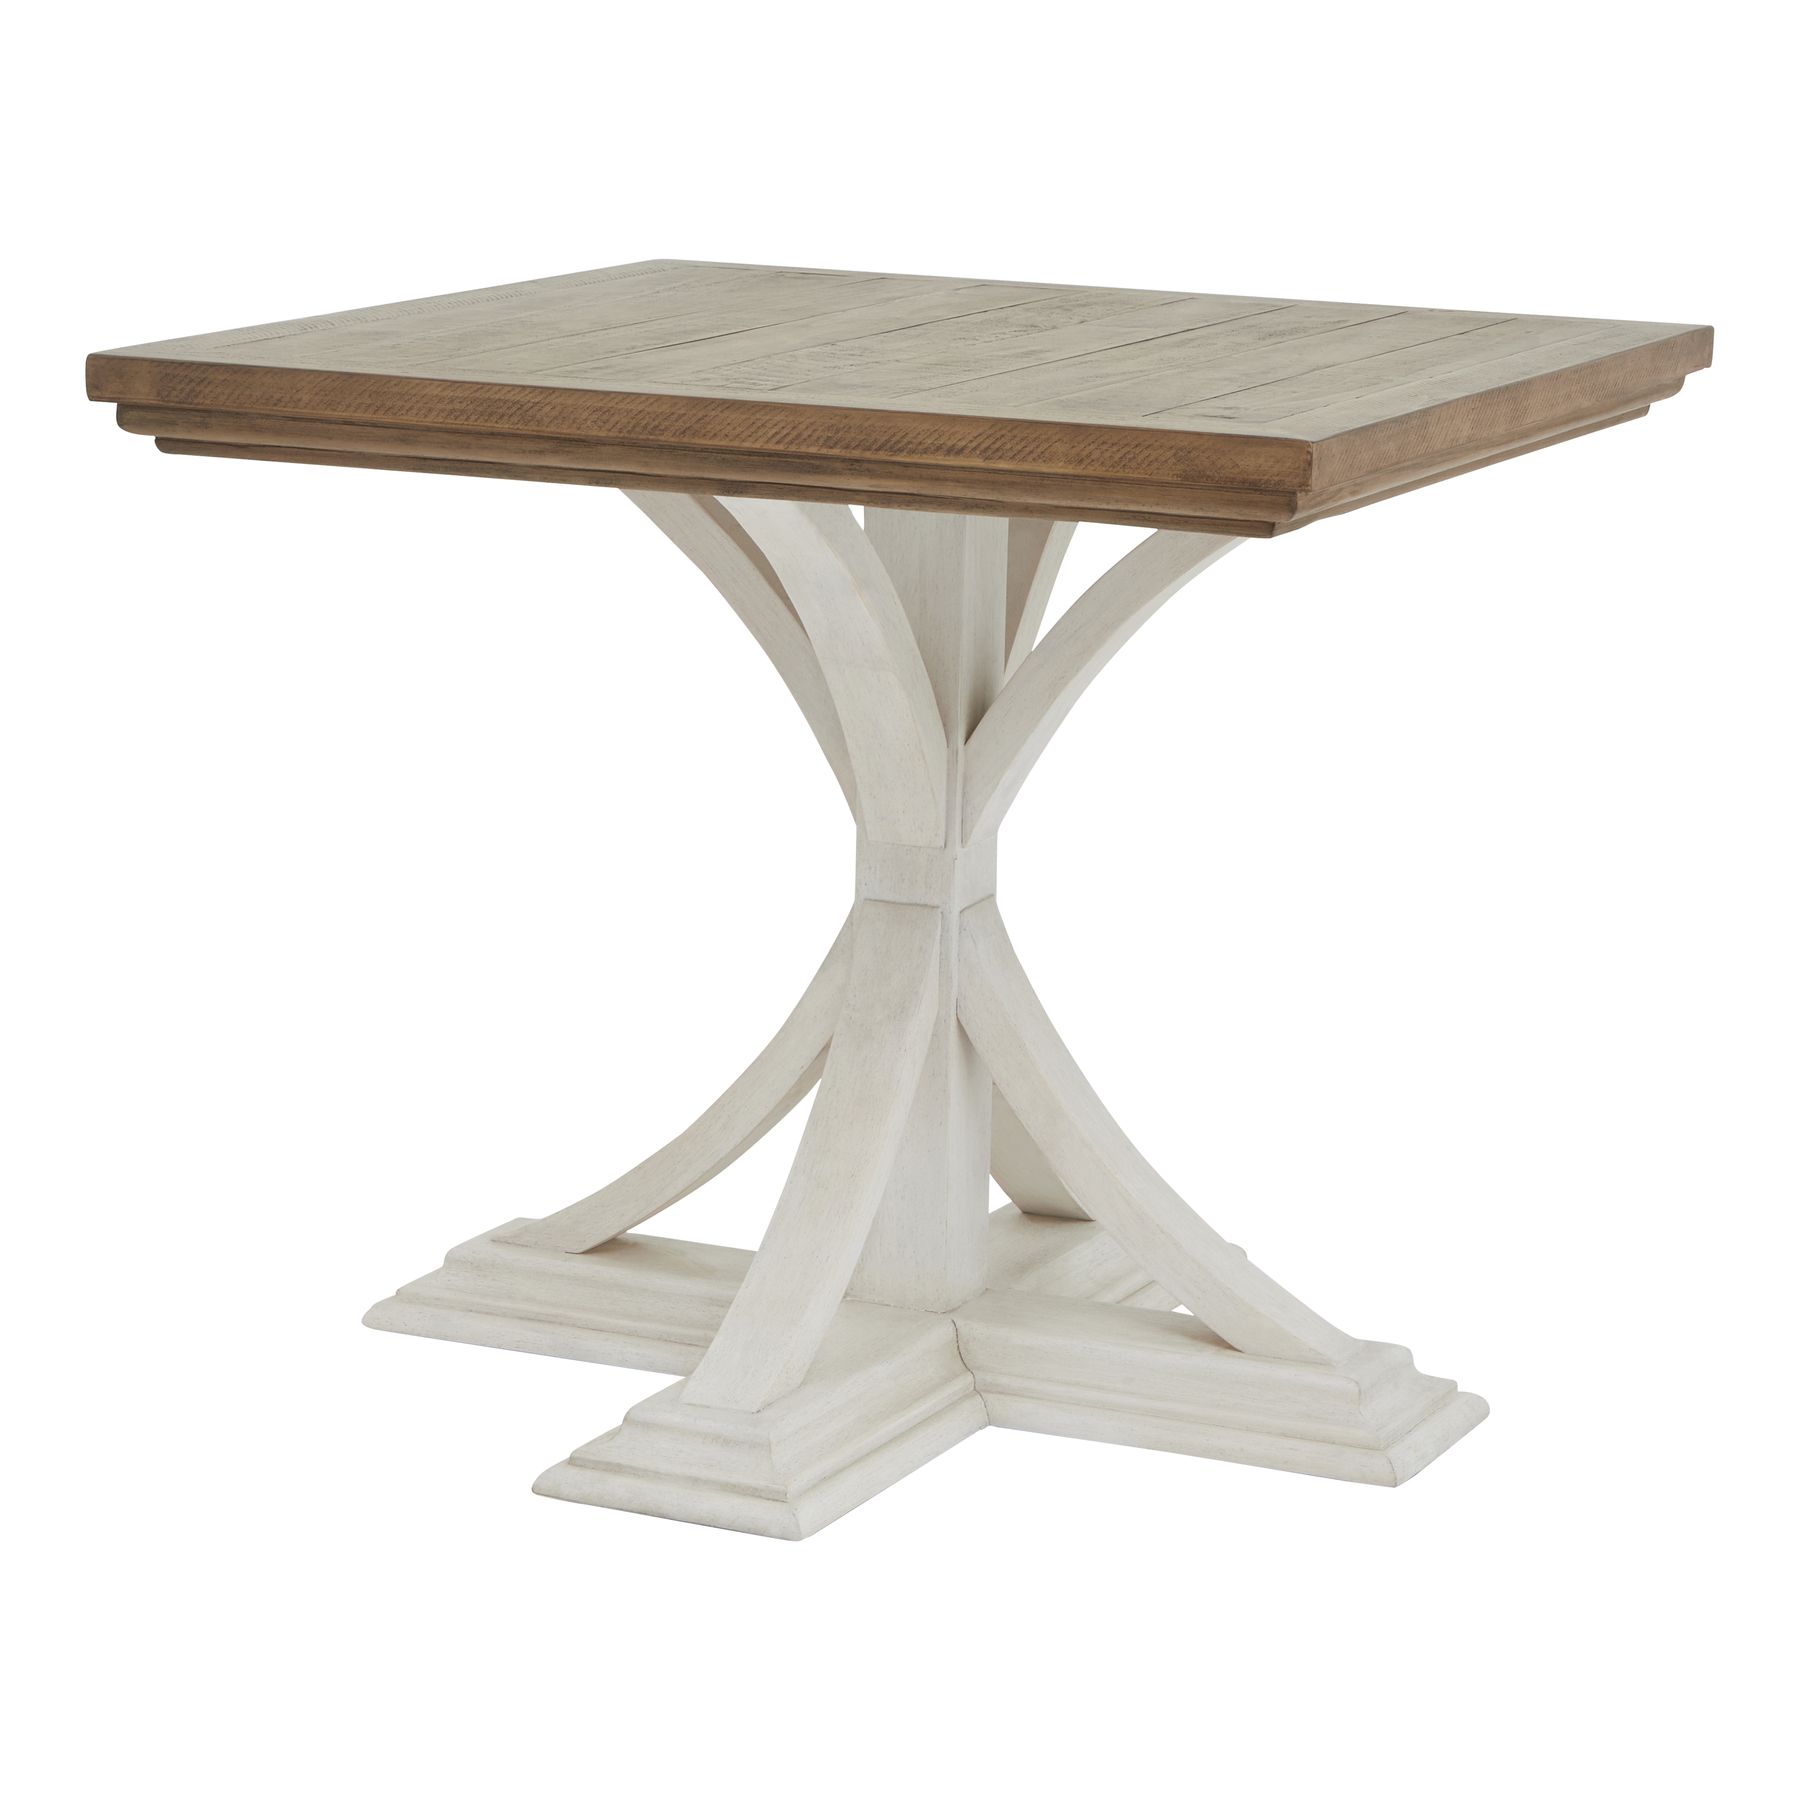 Luna Collection Square Dining Table - Image 1